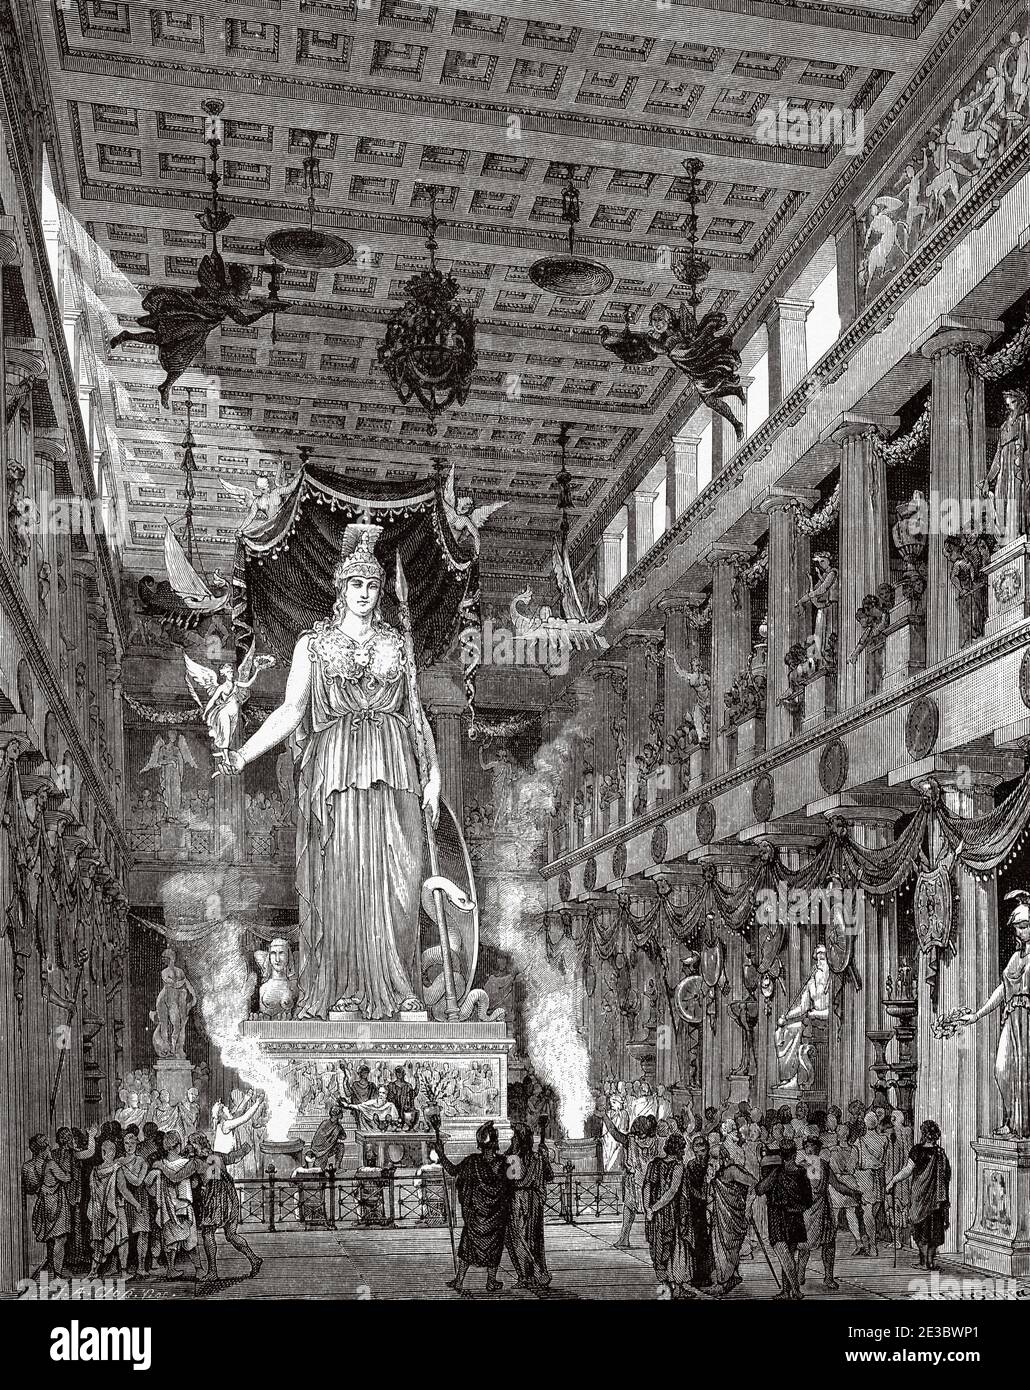 Artistic recreation of the Parthenon during the Classical period Statue of the Goddess Athena. Athens. Ancient Greece. Old 19th century engraved illustration, El Mundo Ilustrado 1880 Stock Photo